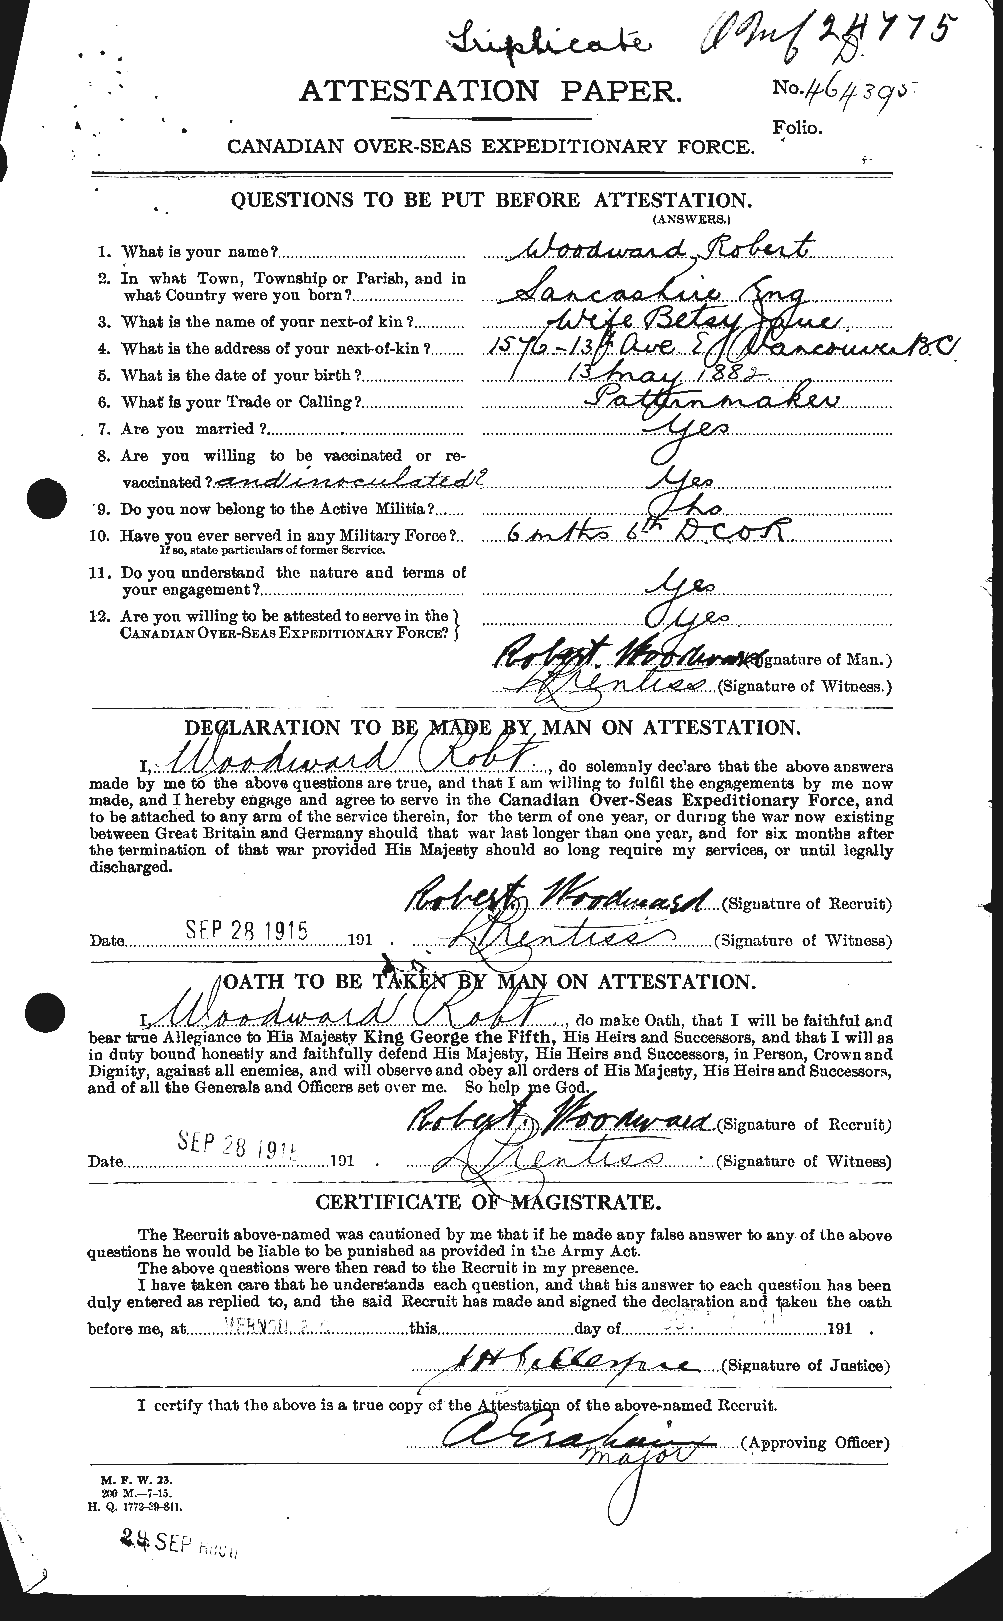 Personnel Records of the First World War - CEF 684866a